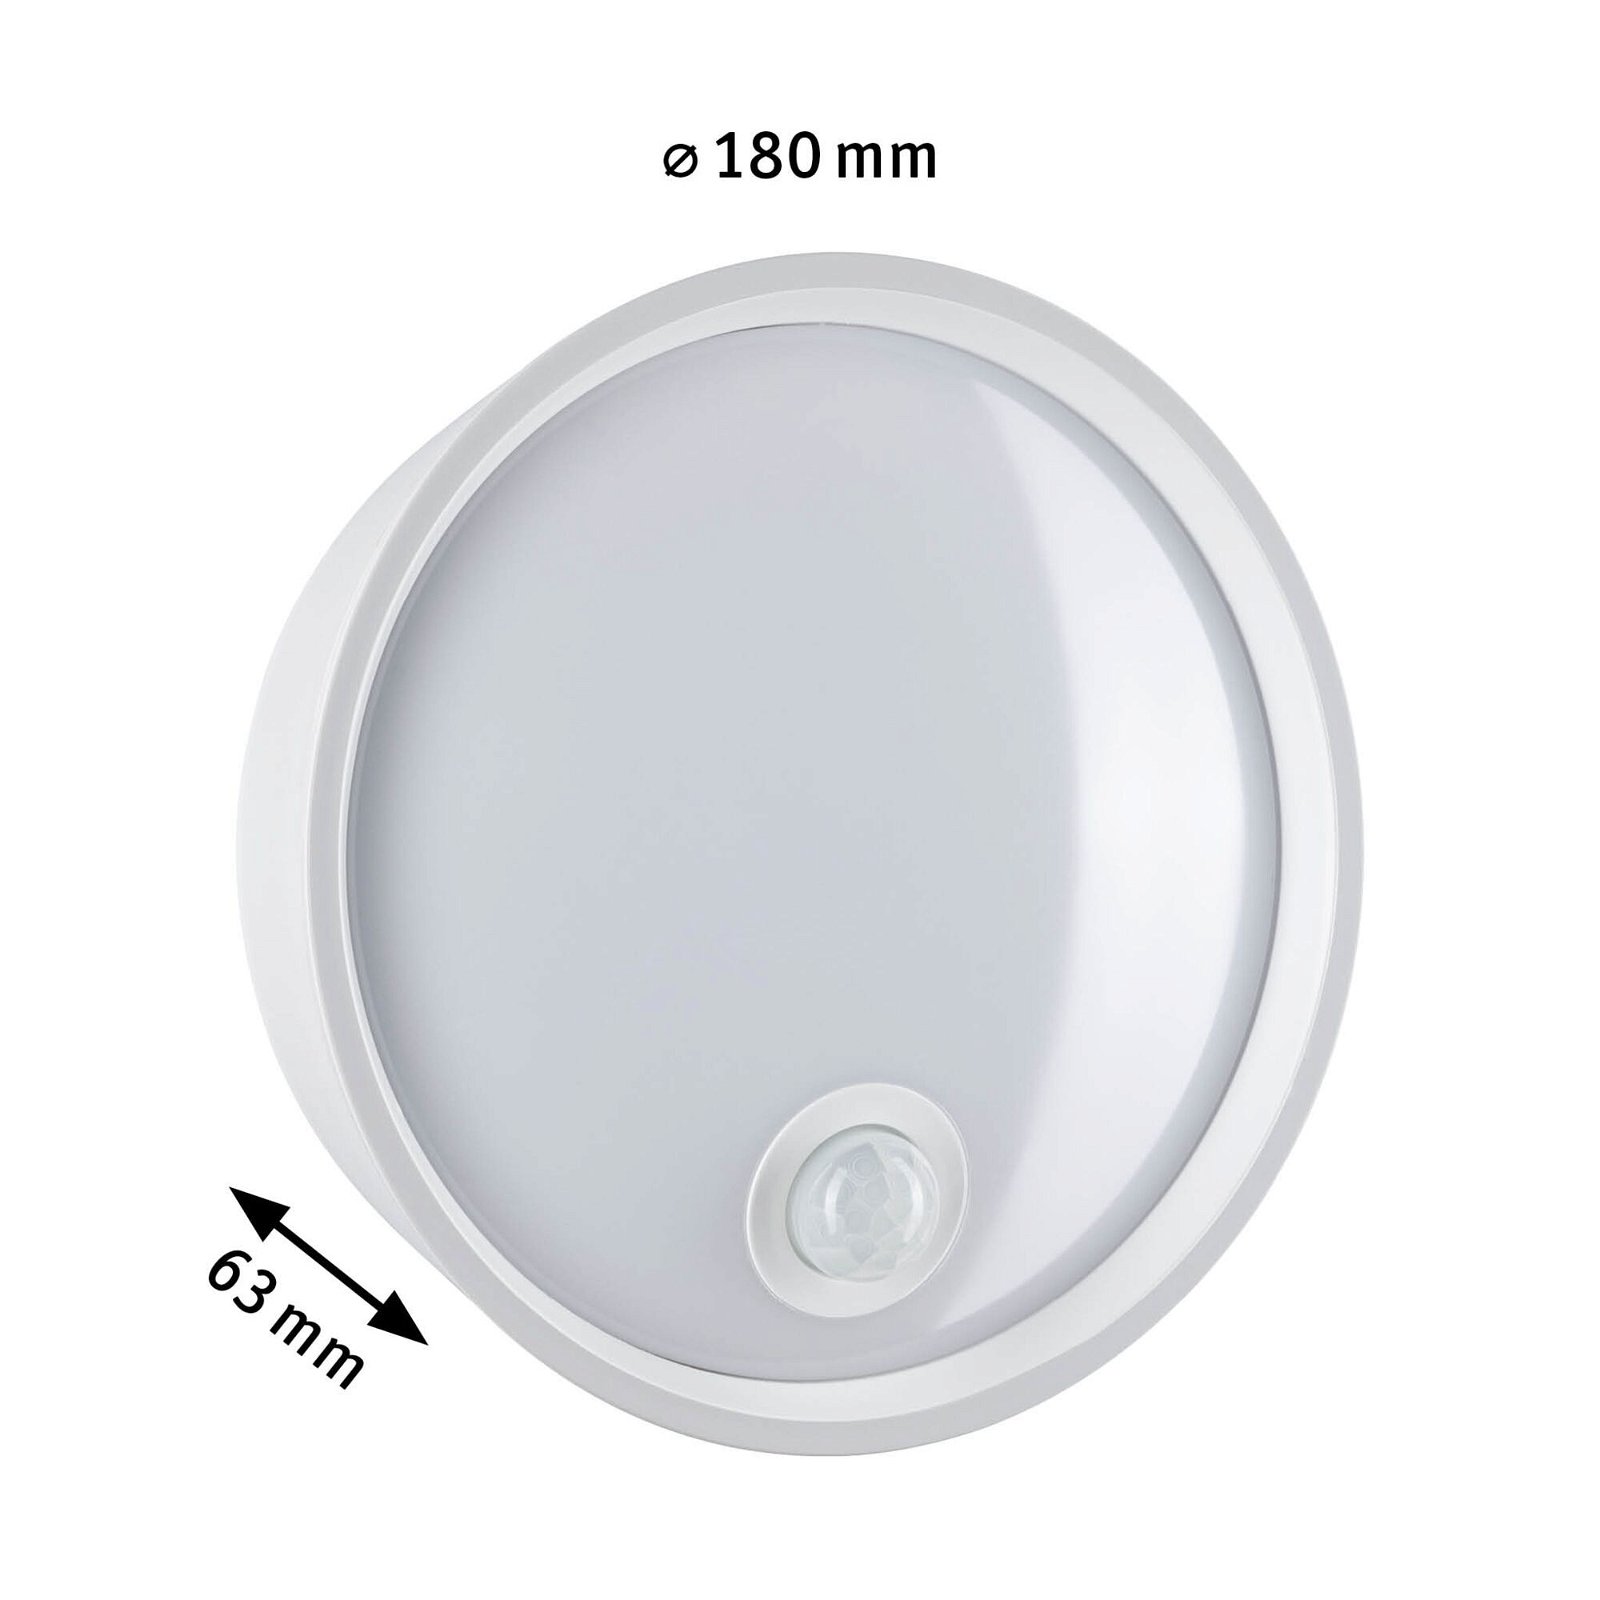 LED Exterior wall luminaire Platomo Motion detector seawater resistant IP44 round 180mm 3000K 14,5W 1200lm 230V White Plastic